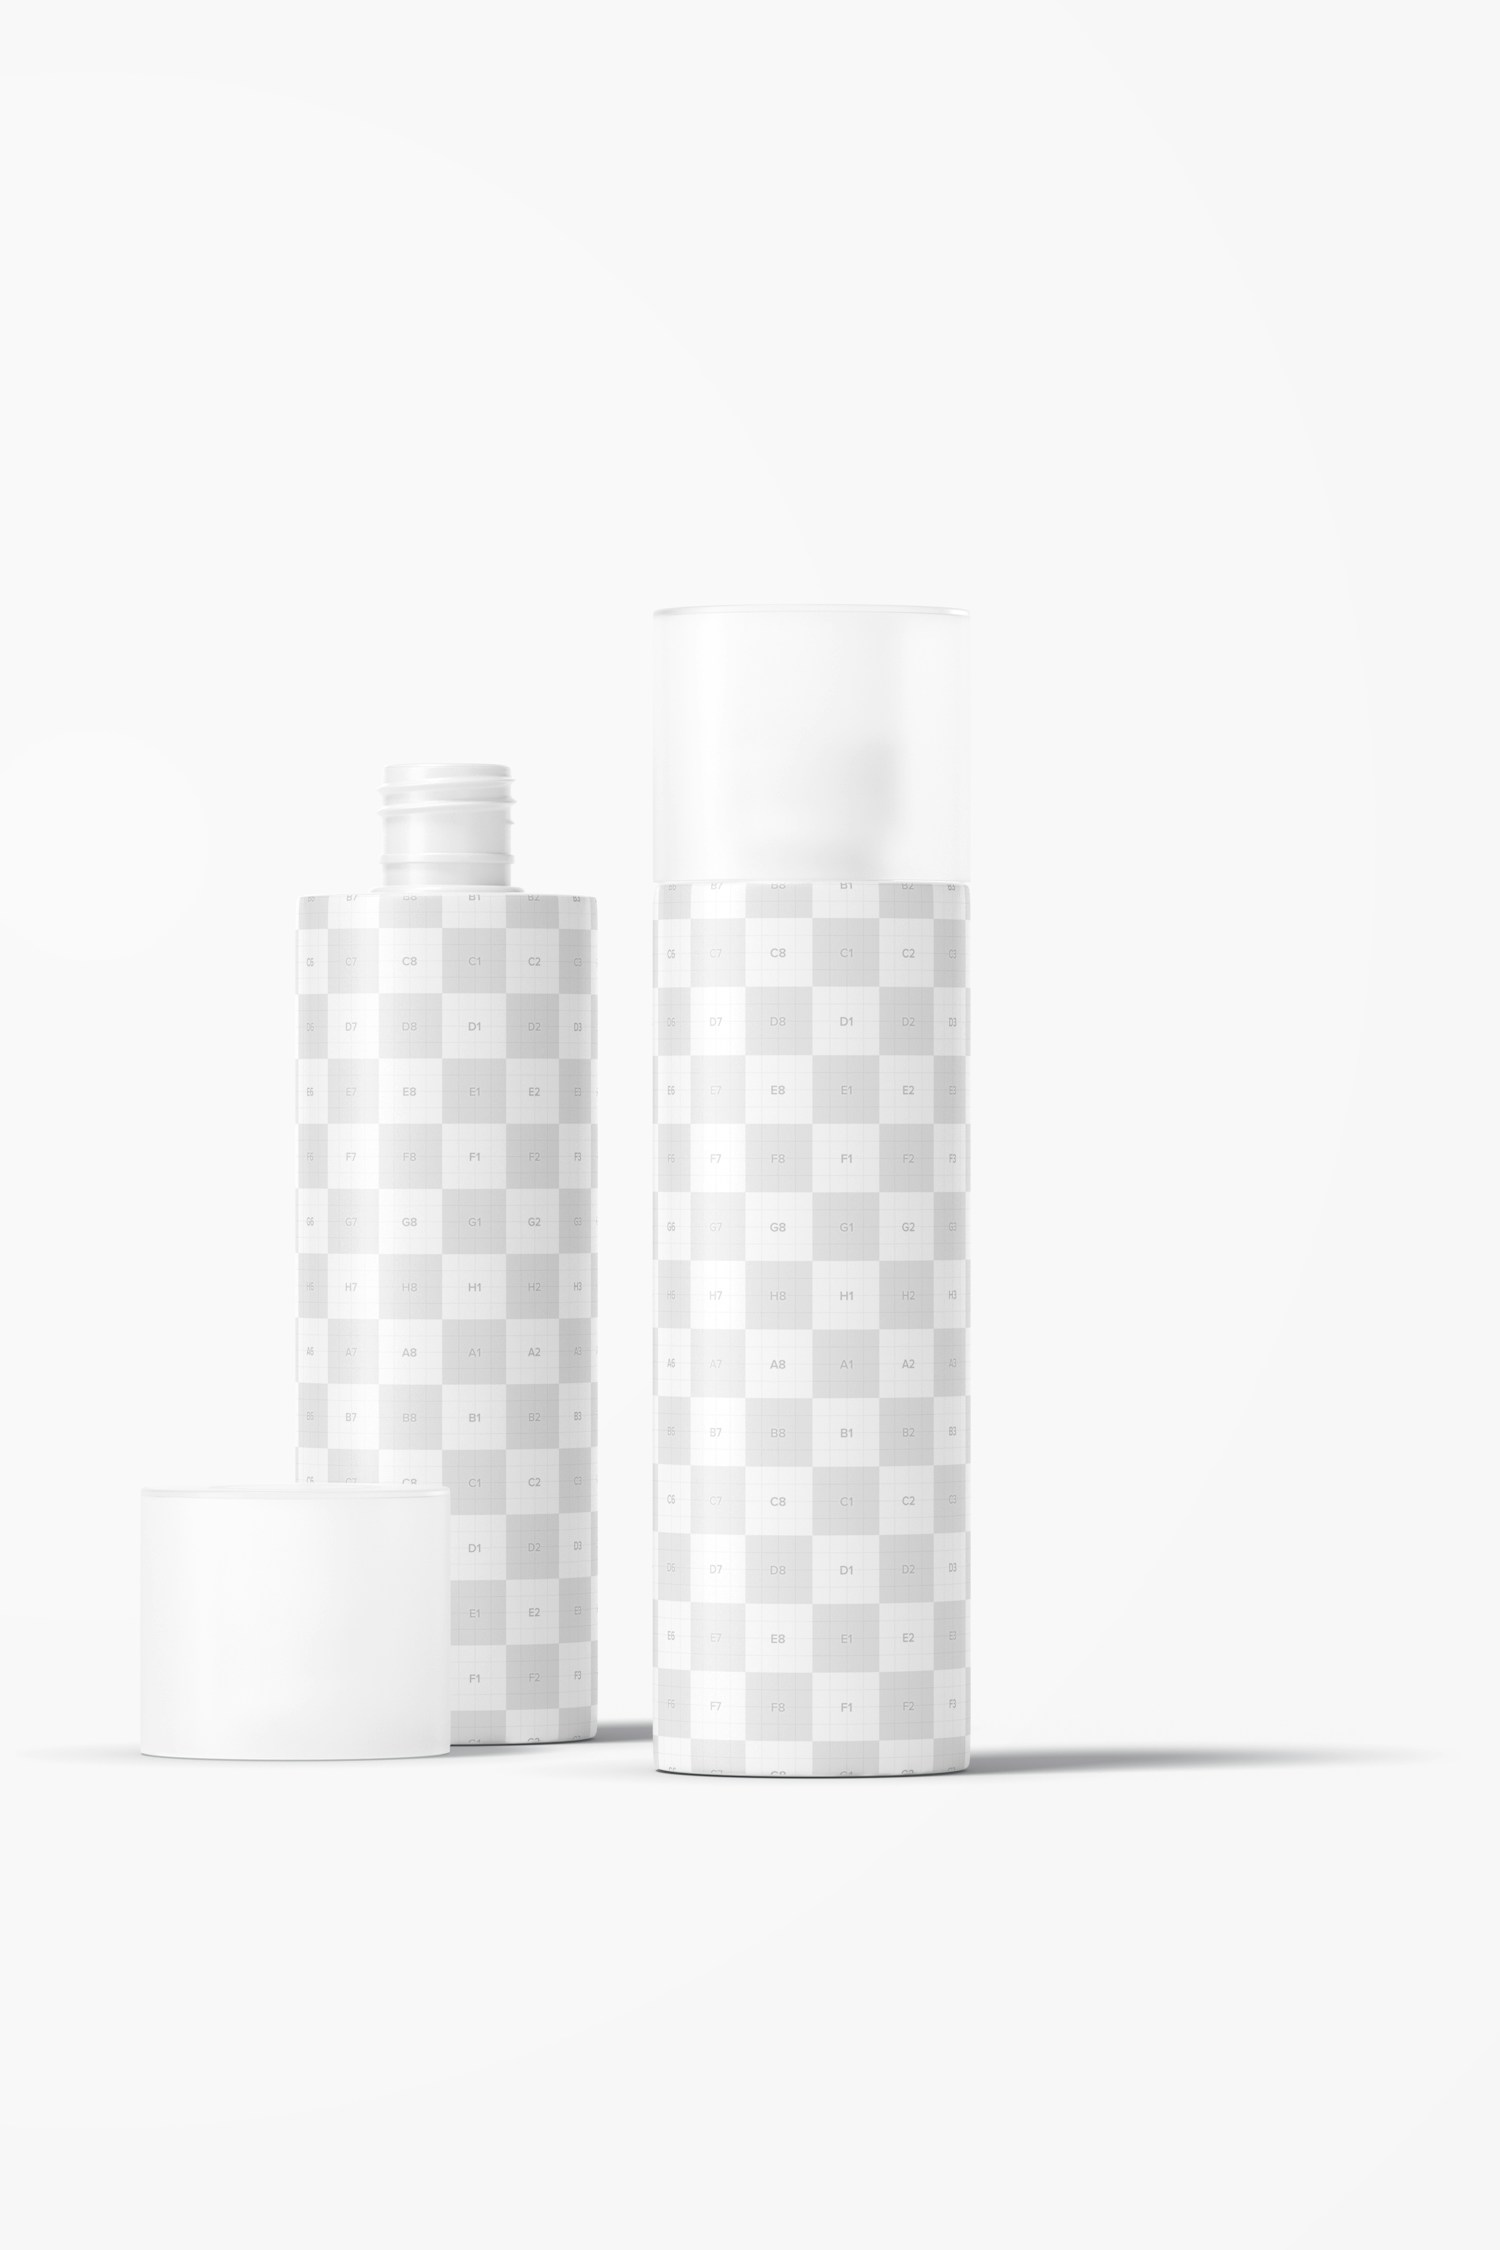 5 oz Plastic Bottles Mockup, Opened and Closed